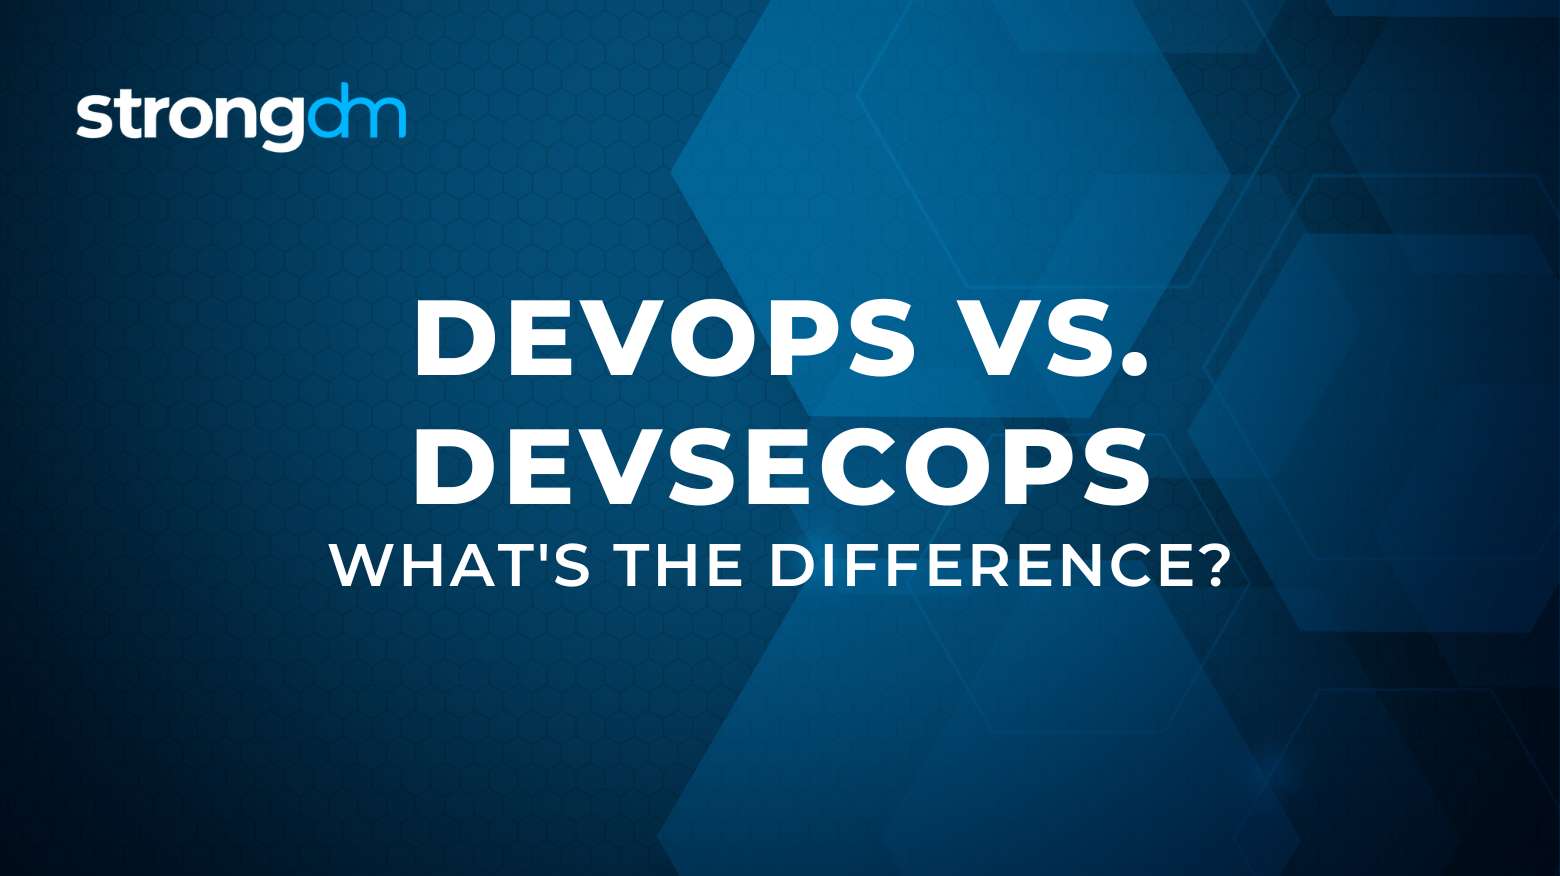 DevOps and DevSecOps: Understanding the Difference